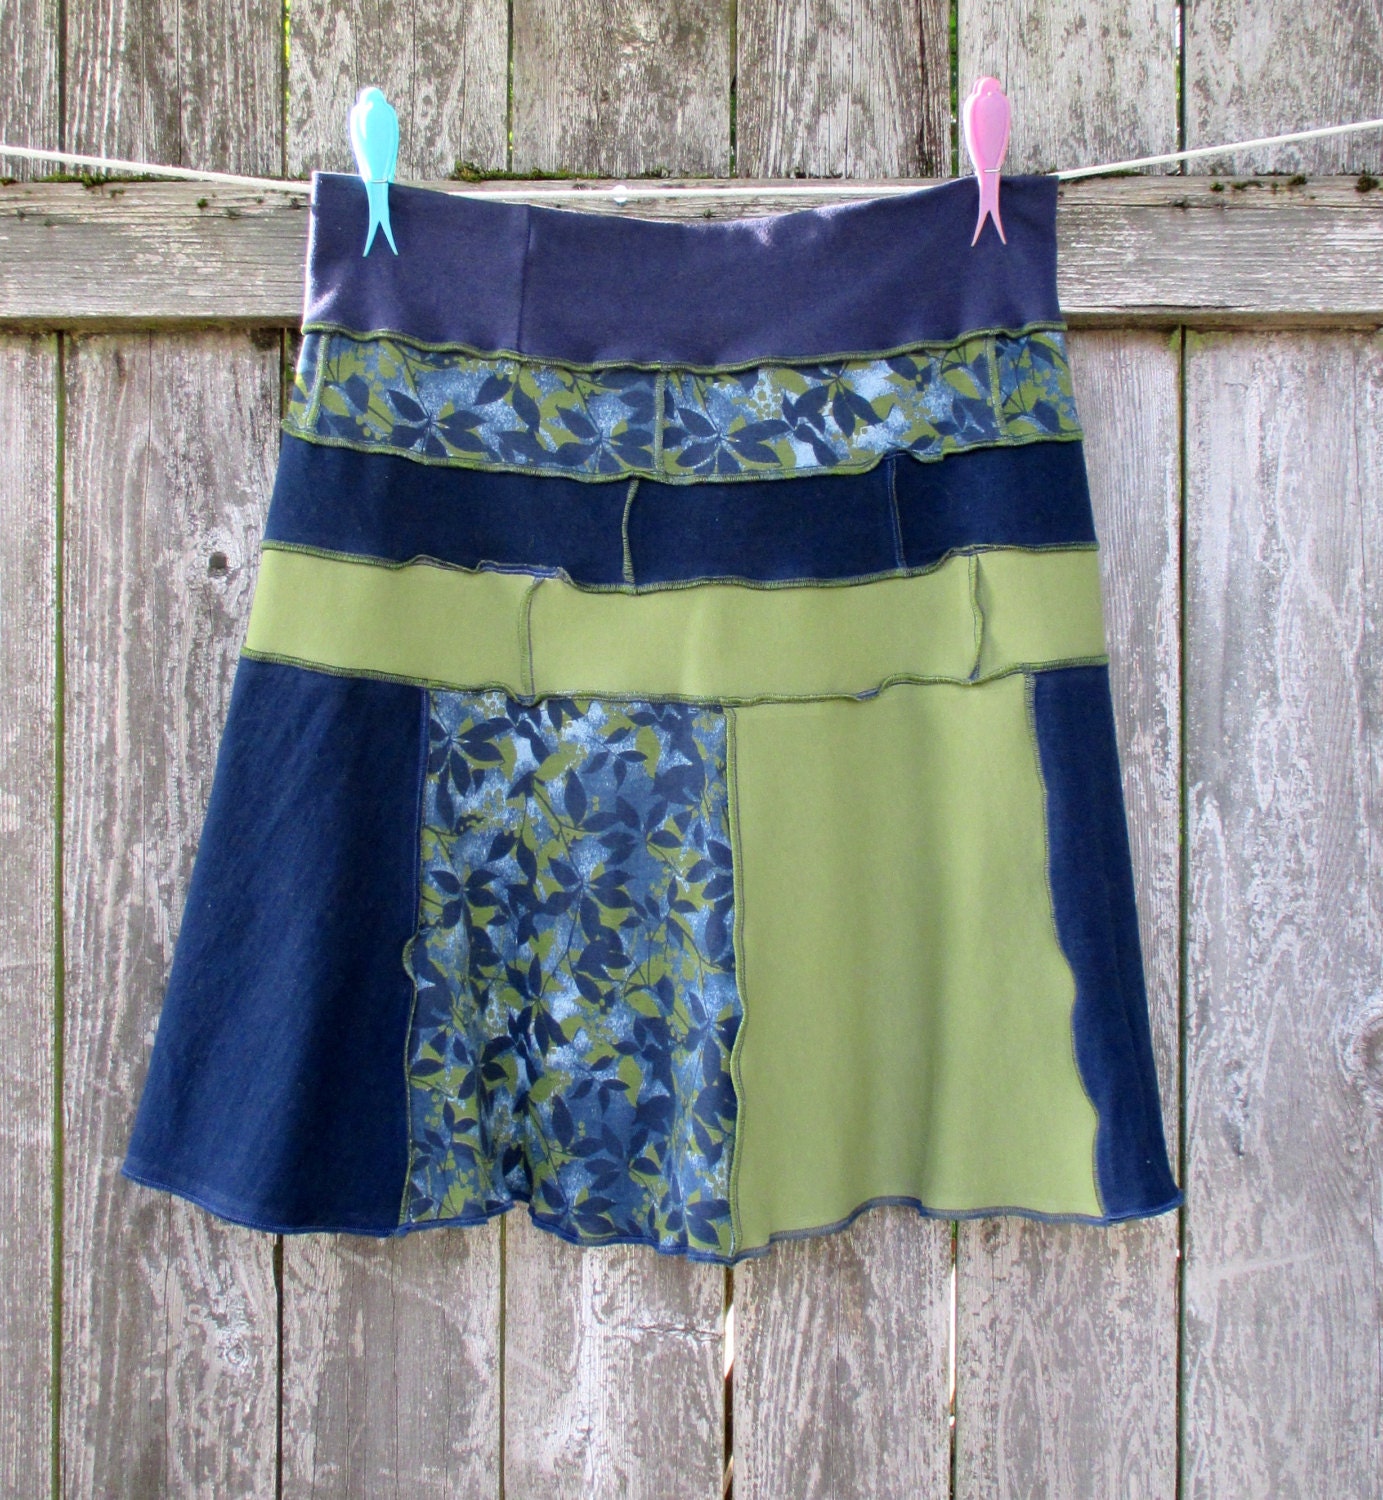 Upcycled Skirt T Shirt Skirt Olive Navy Recycled by ThankfulRose